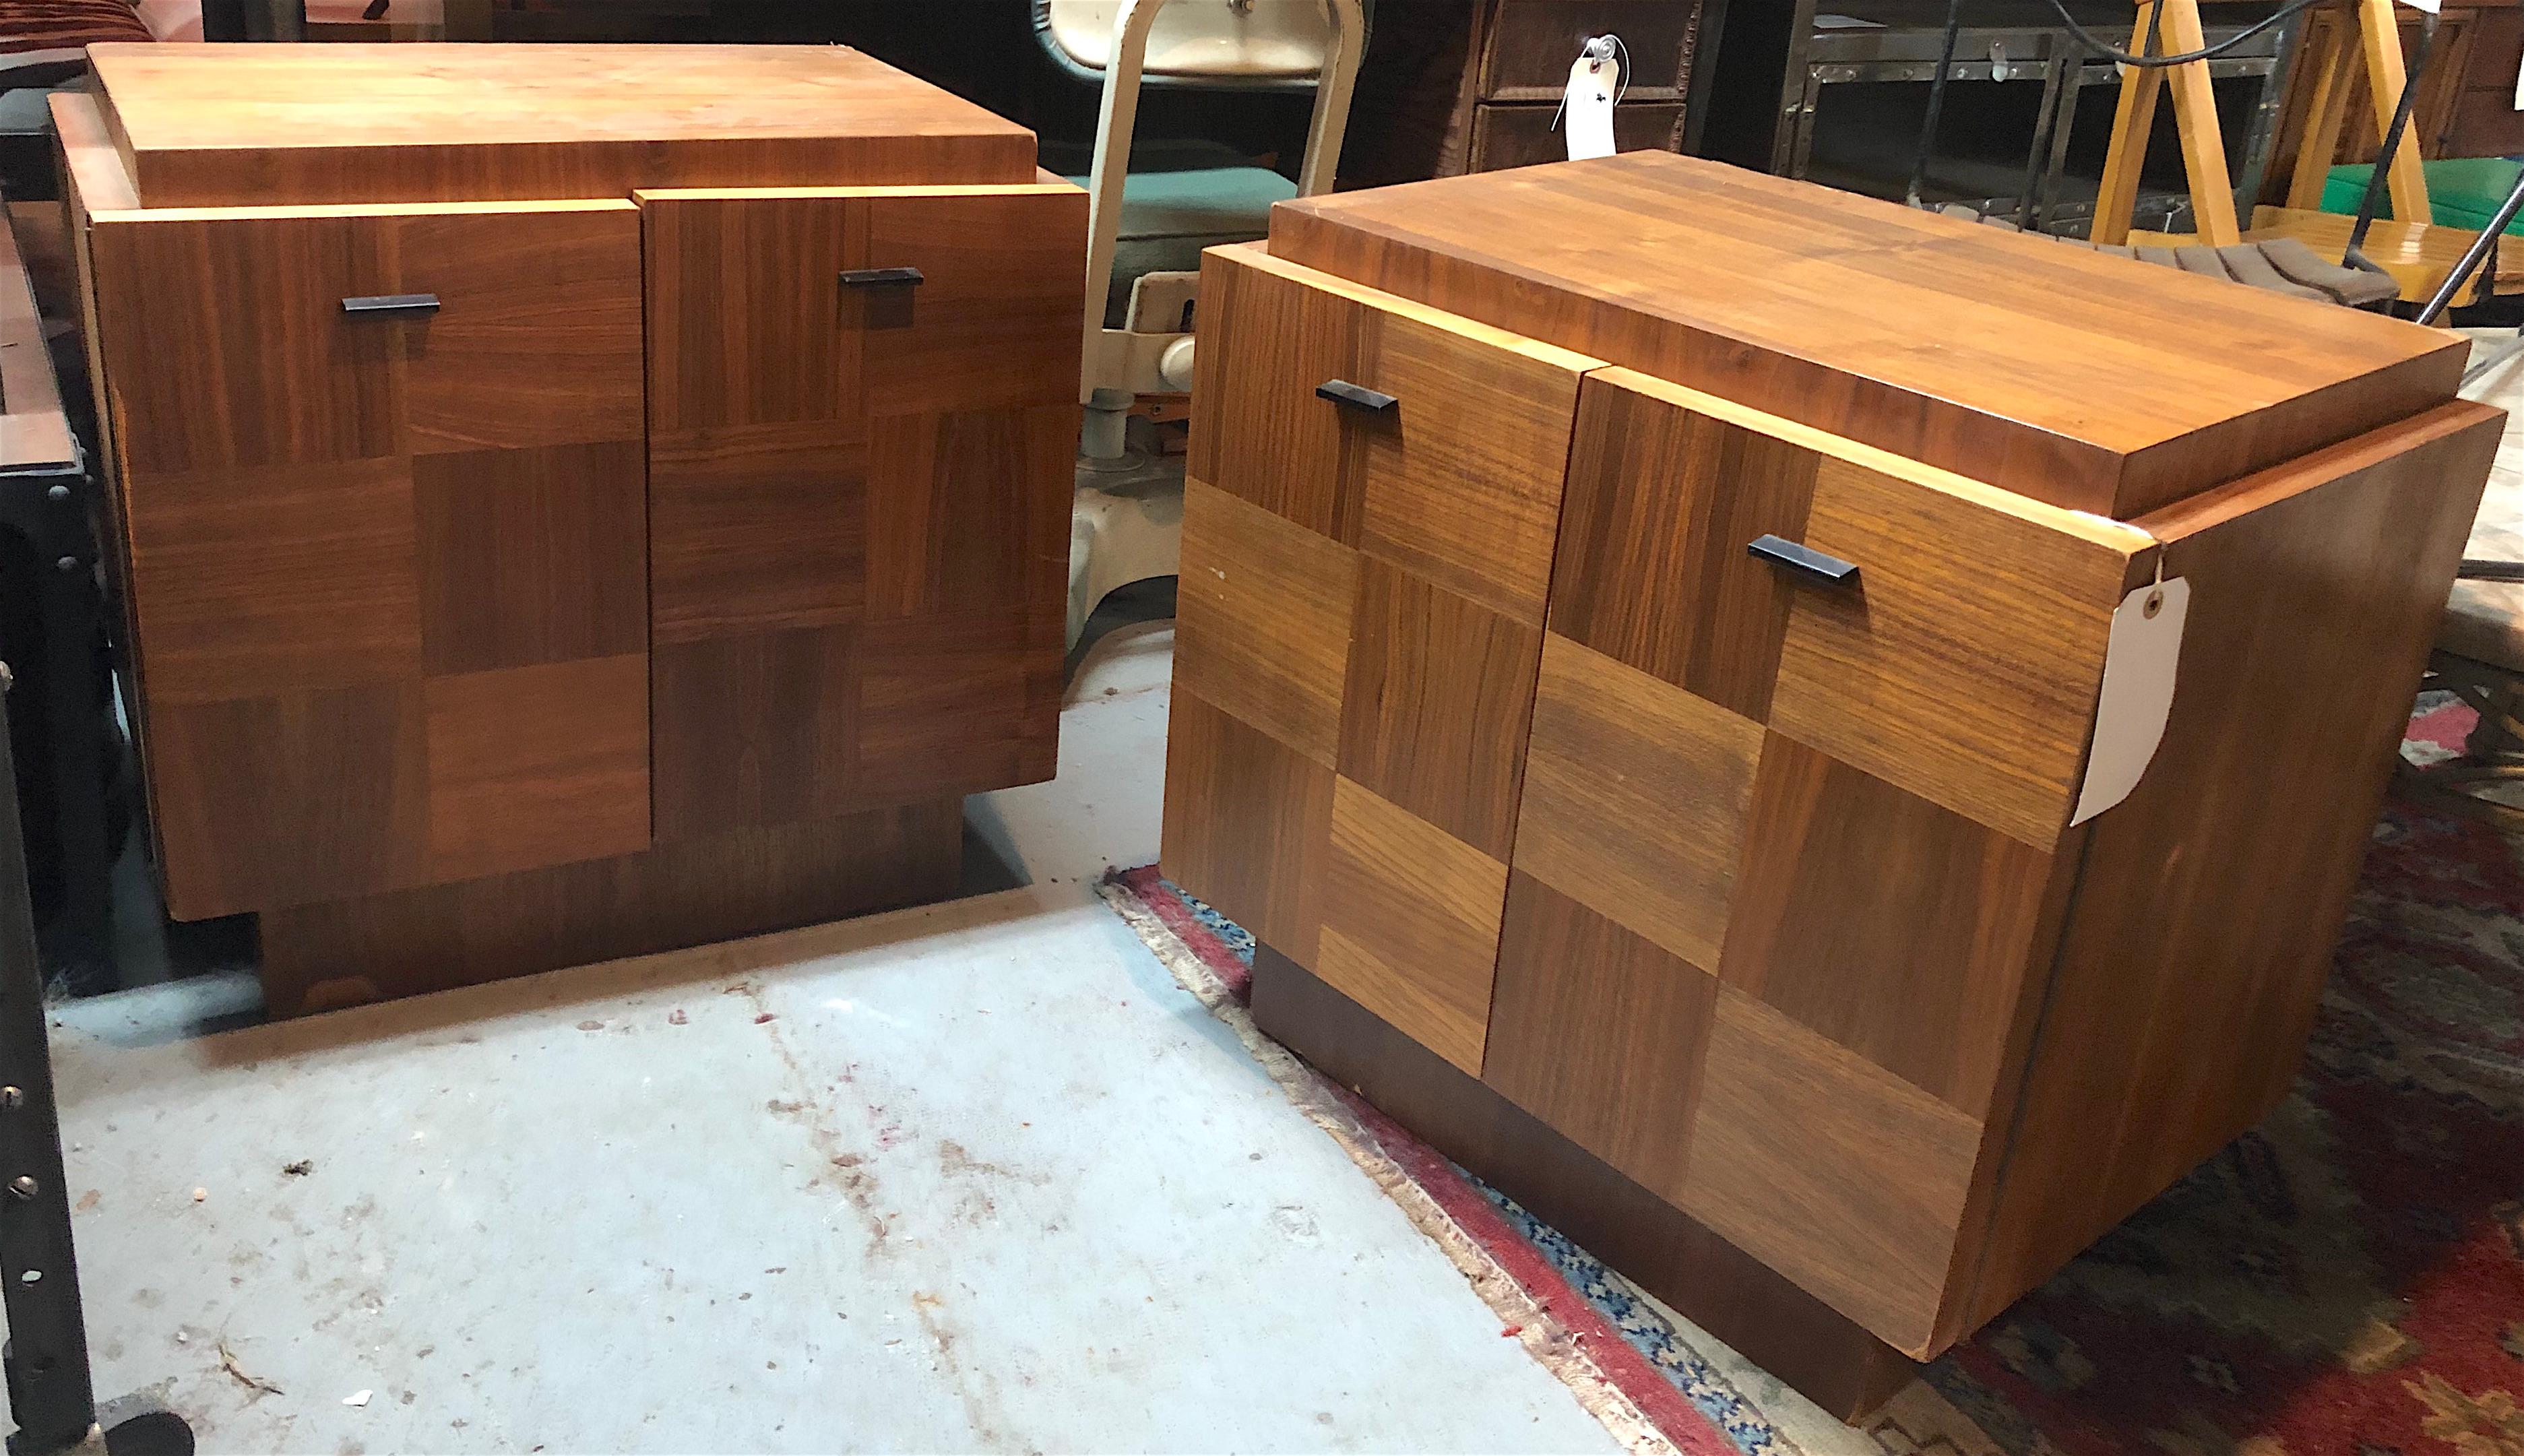 Robust nightstands from Canada's Mid-Century Modern masters at Tabago Furniture. Featuring checkered walnut and oak veneers and showcasing a subtle Brutalist design, the double doors open to reveal ample case storage, perfect for vinyl records,